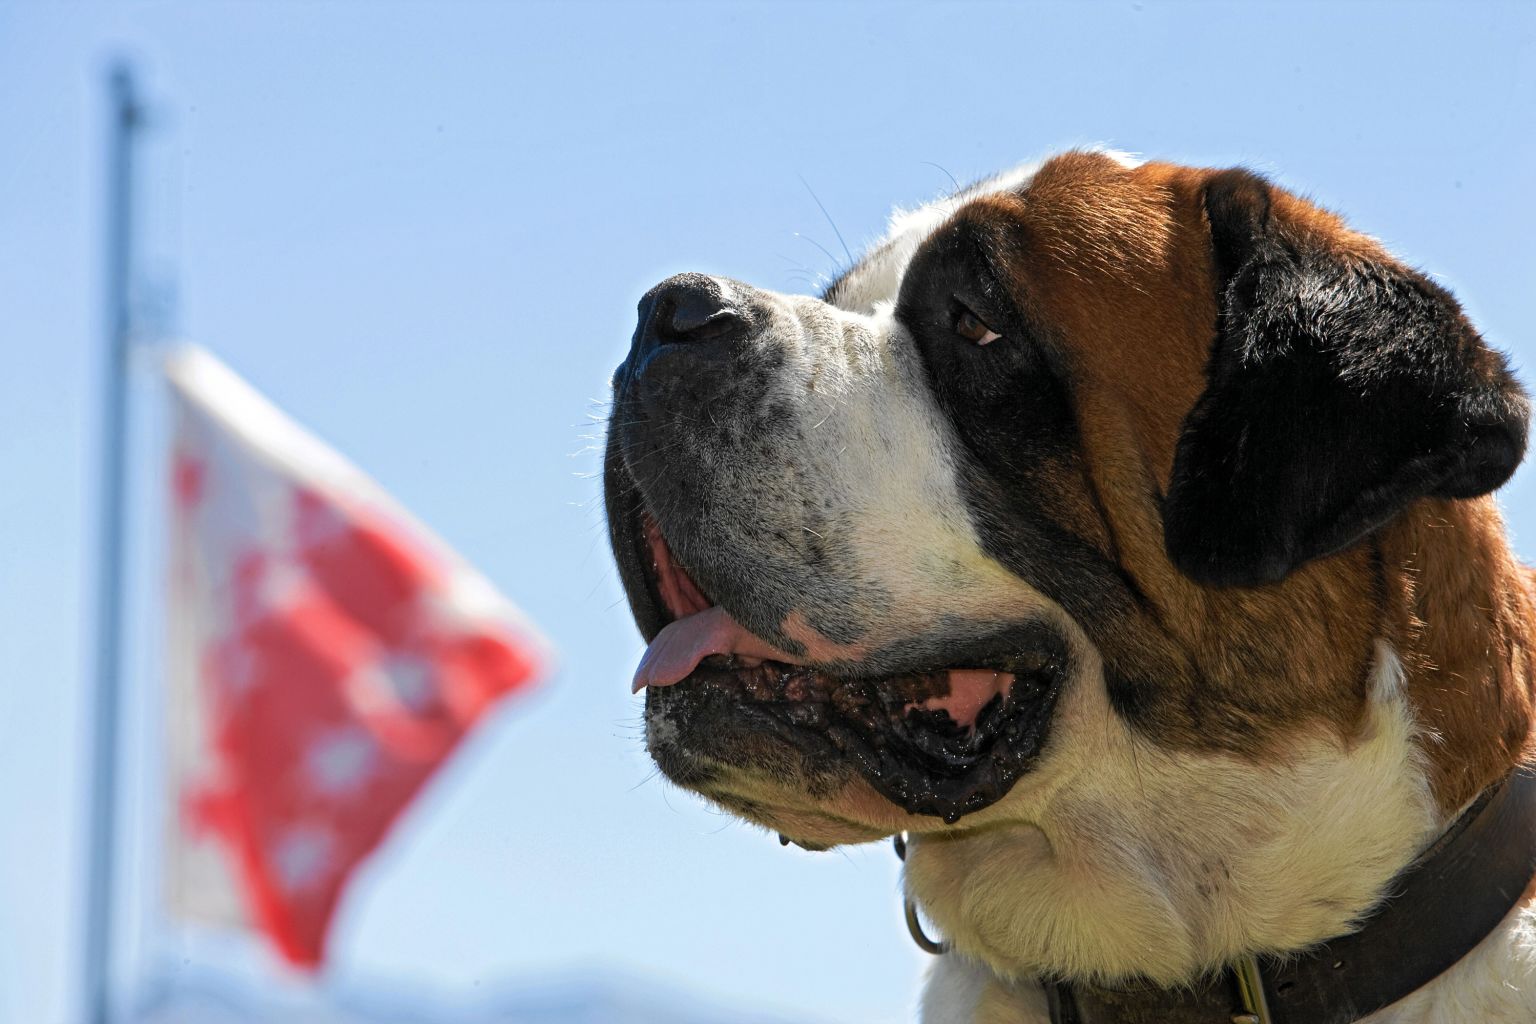 St-Bernard dogs in front of the valais flag